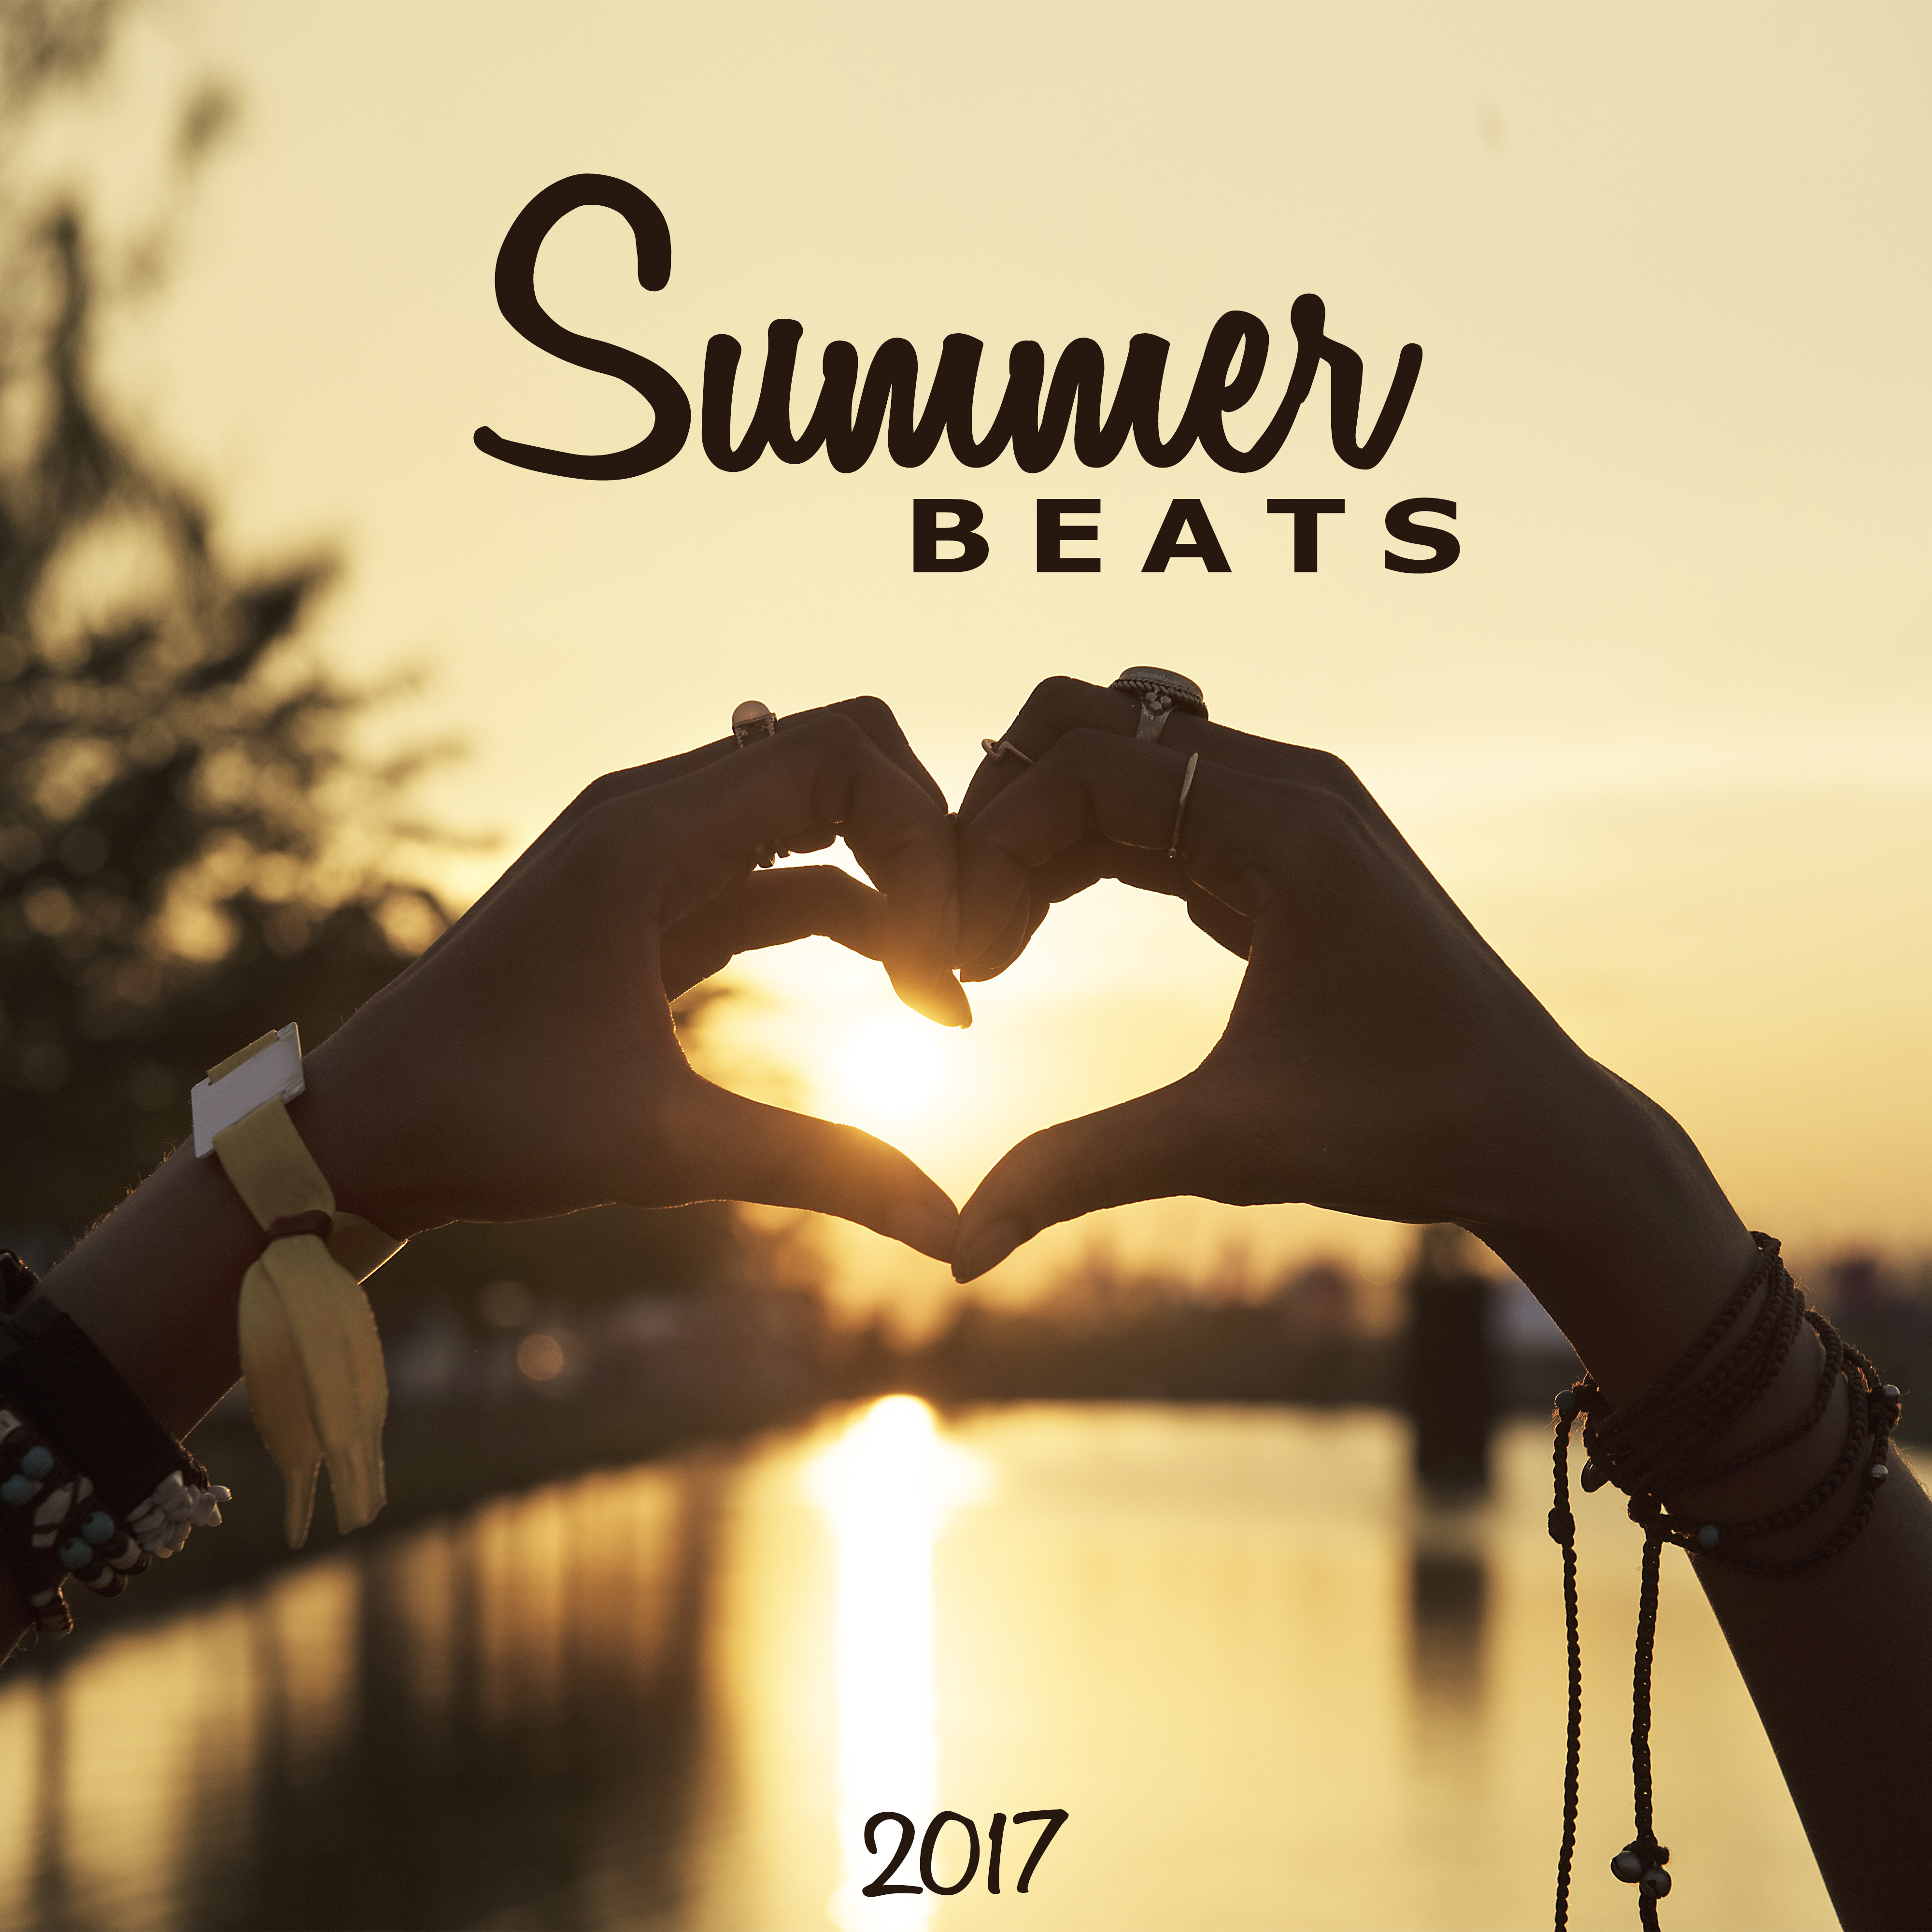 Summer Beats 2017 – Holiday Melodies, Relaxing Time, Beach House Lounge, Summer 2017, Chill Out Music